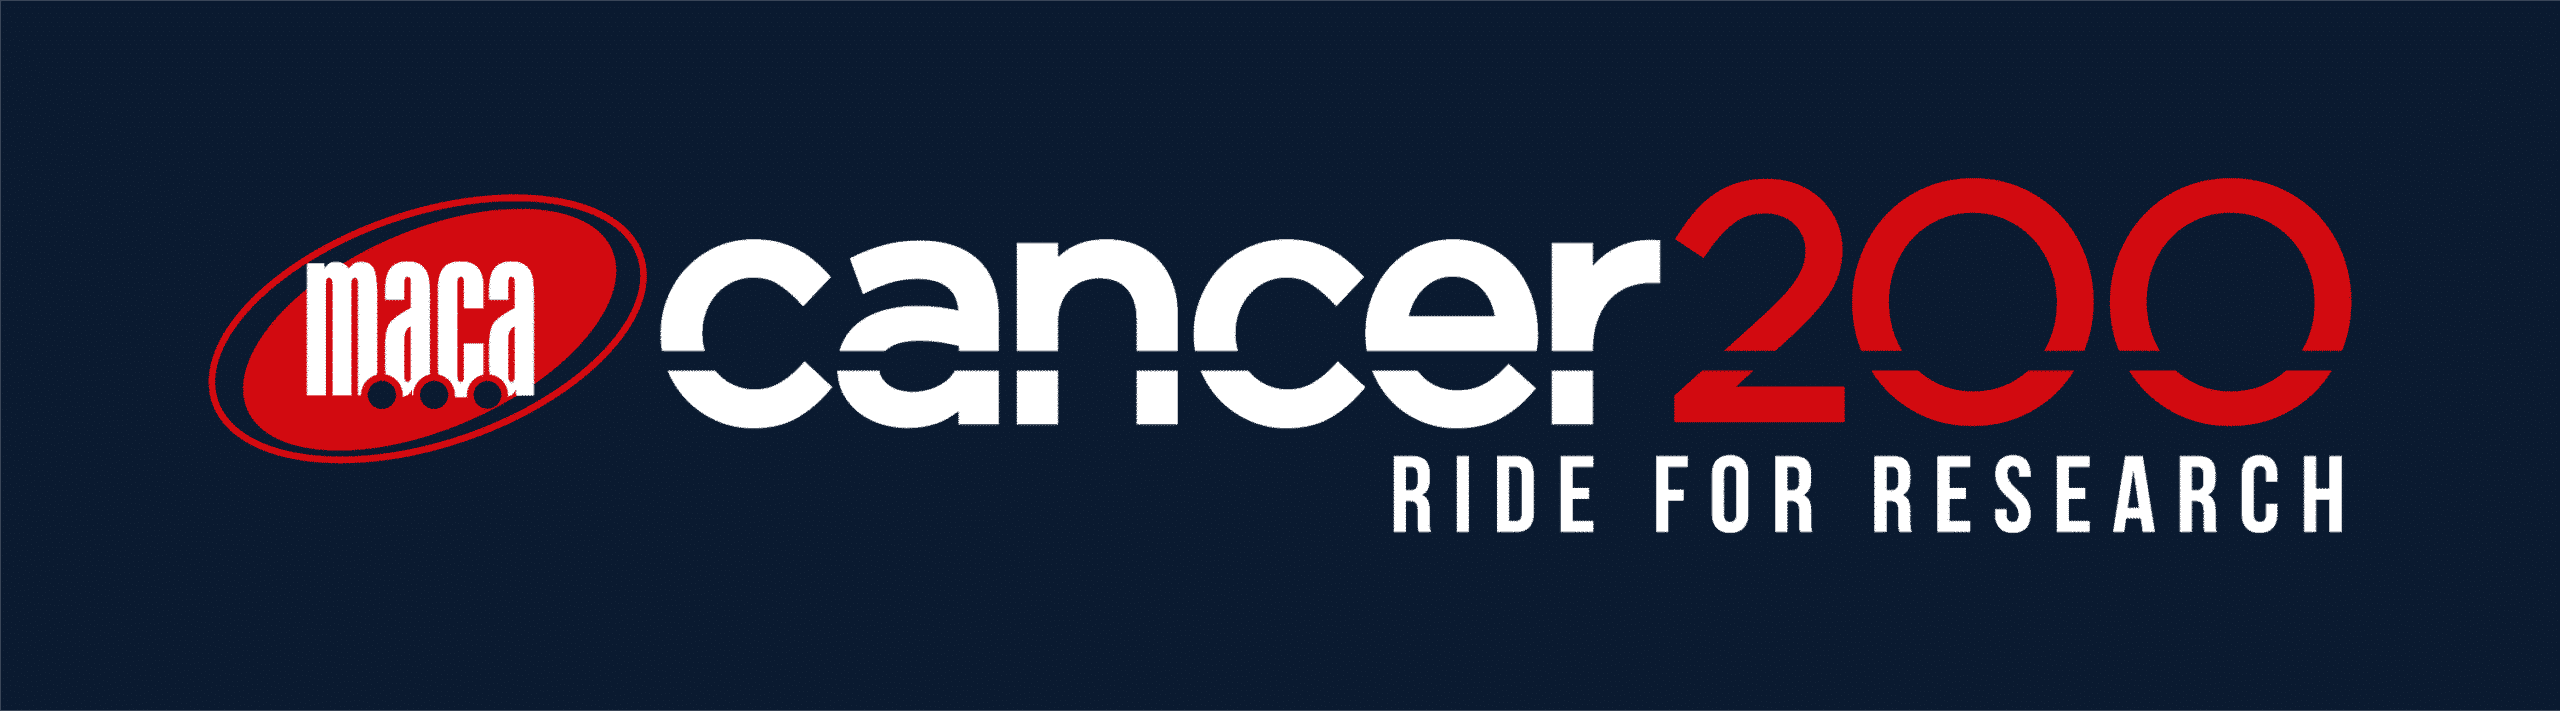 Maca Raffle Ride for Cancer Research 2022